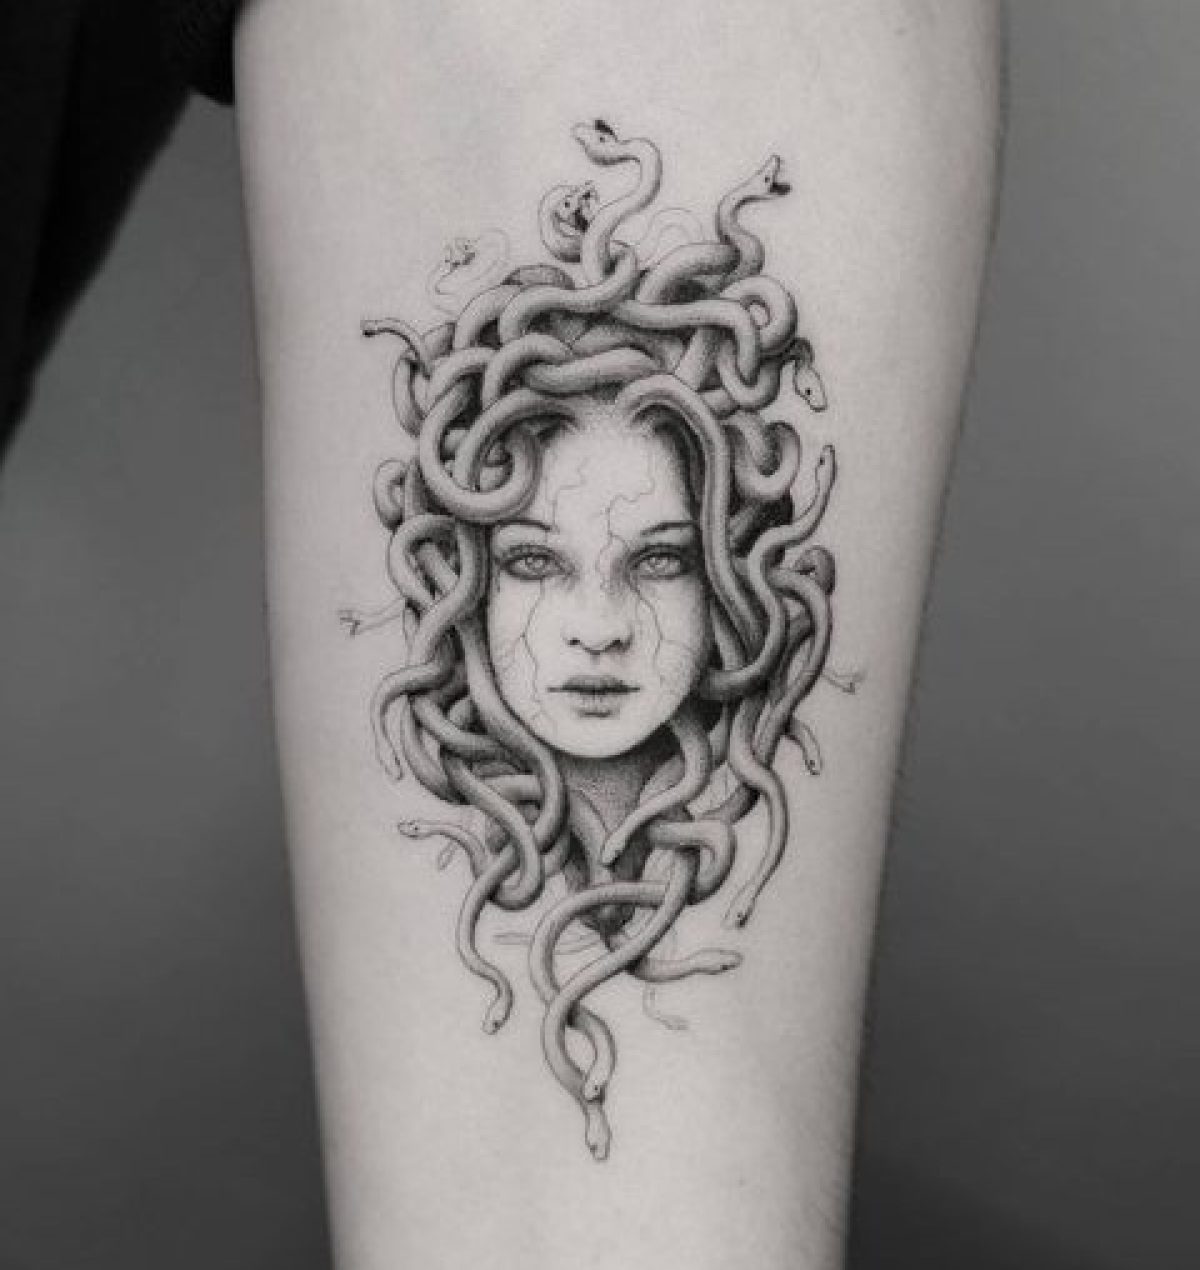 Medusa Tattoos: The Myth and Meanings Behind Them